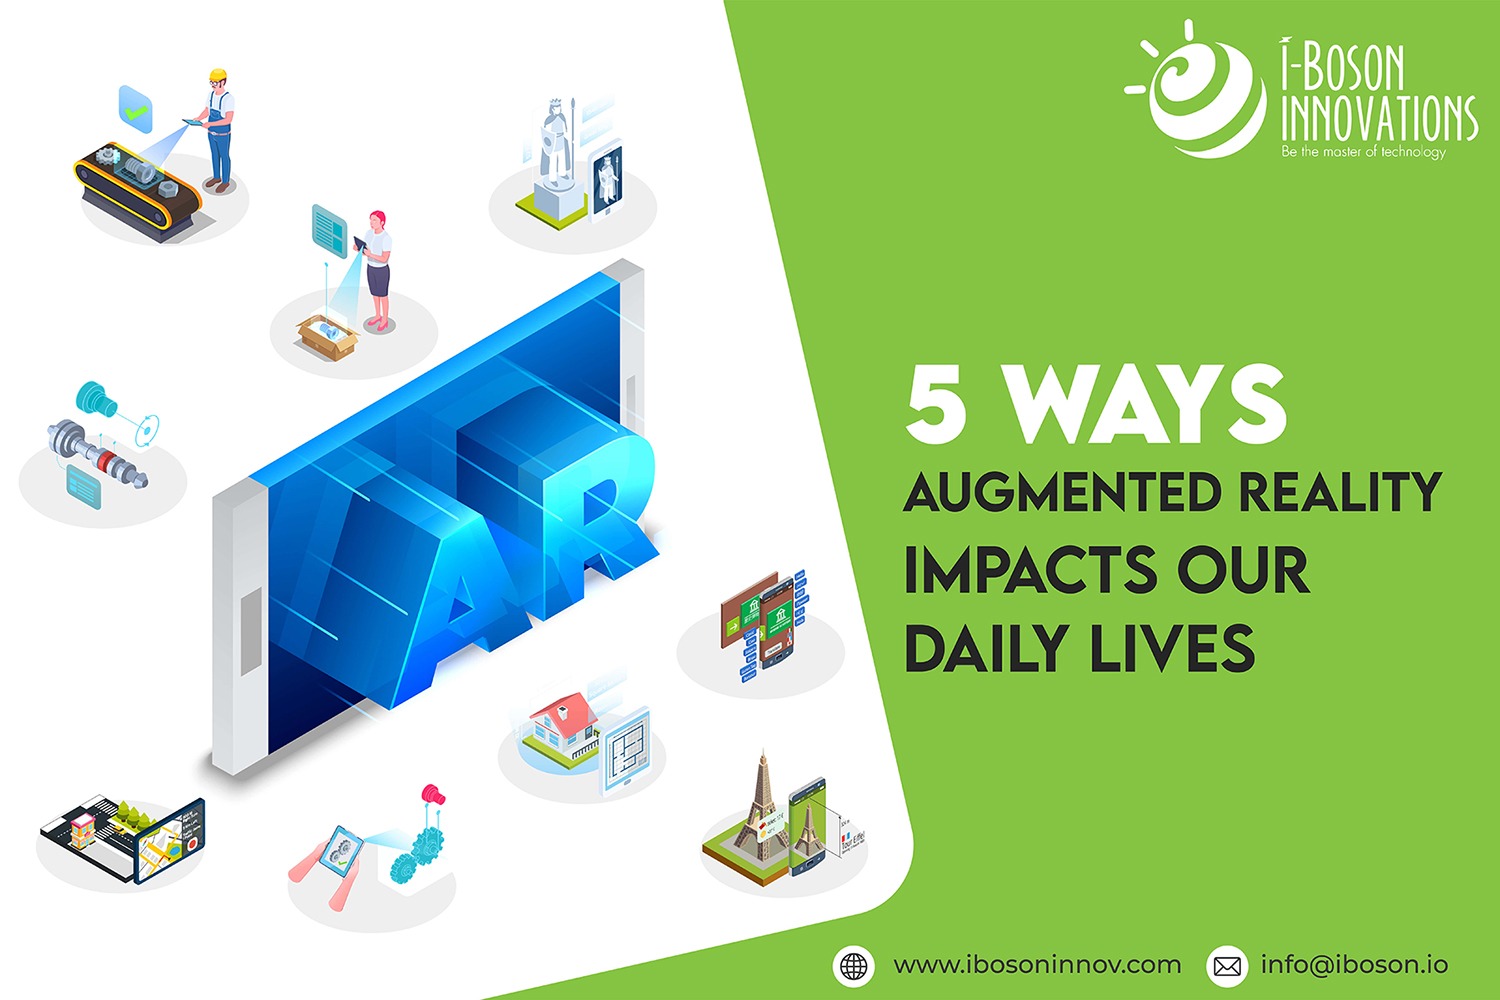 5 ways augmented reality impacts our daily lives